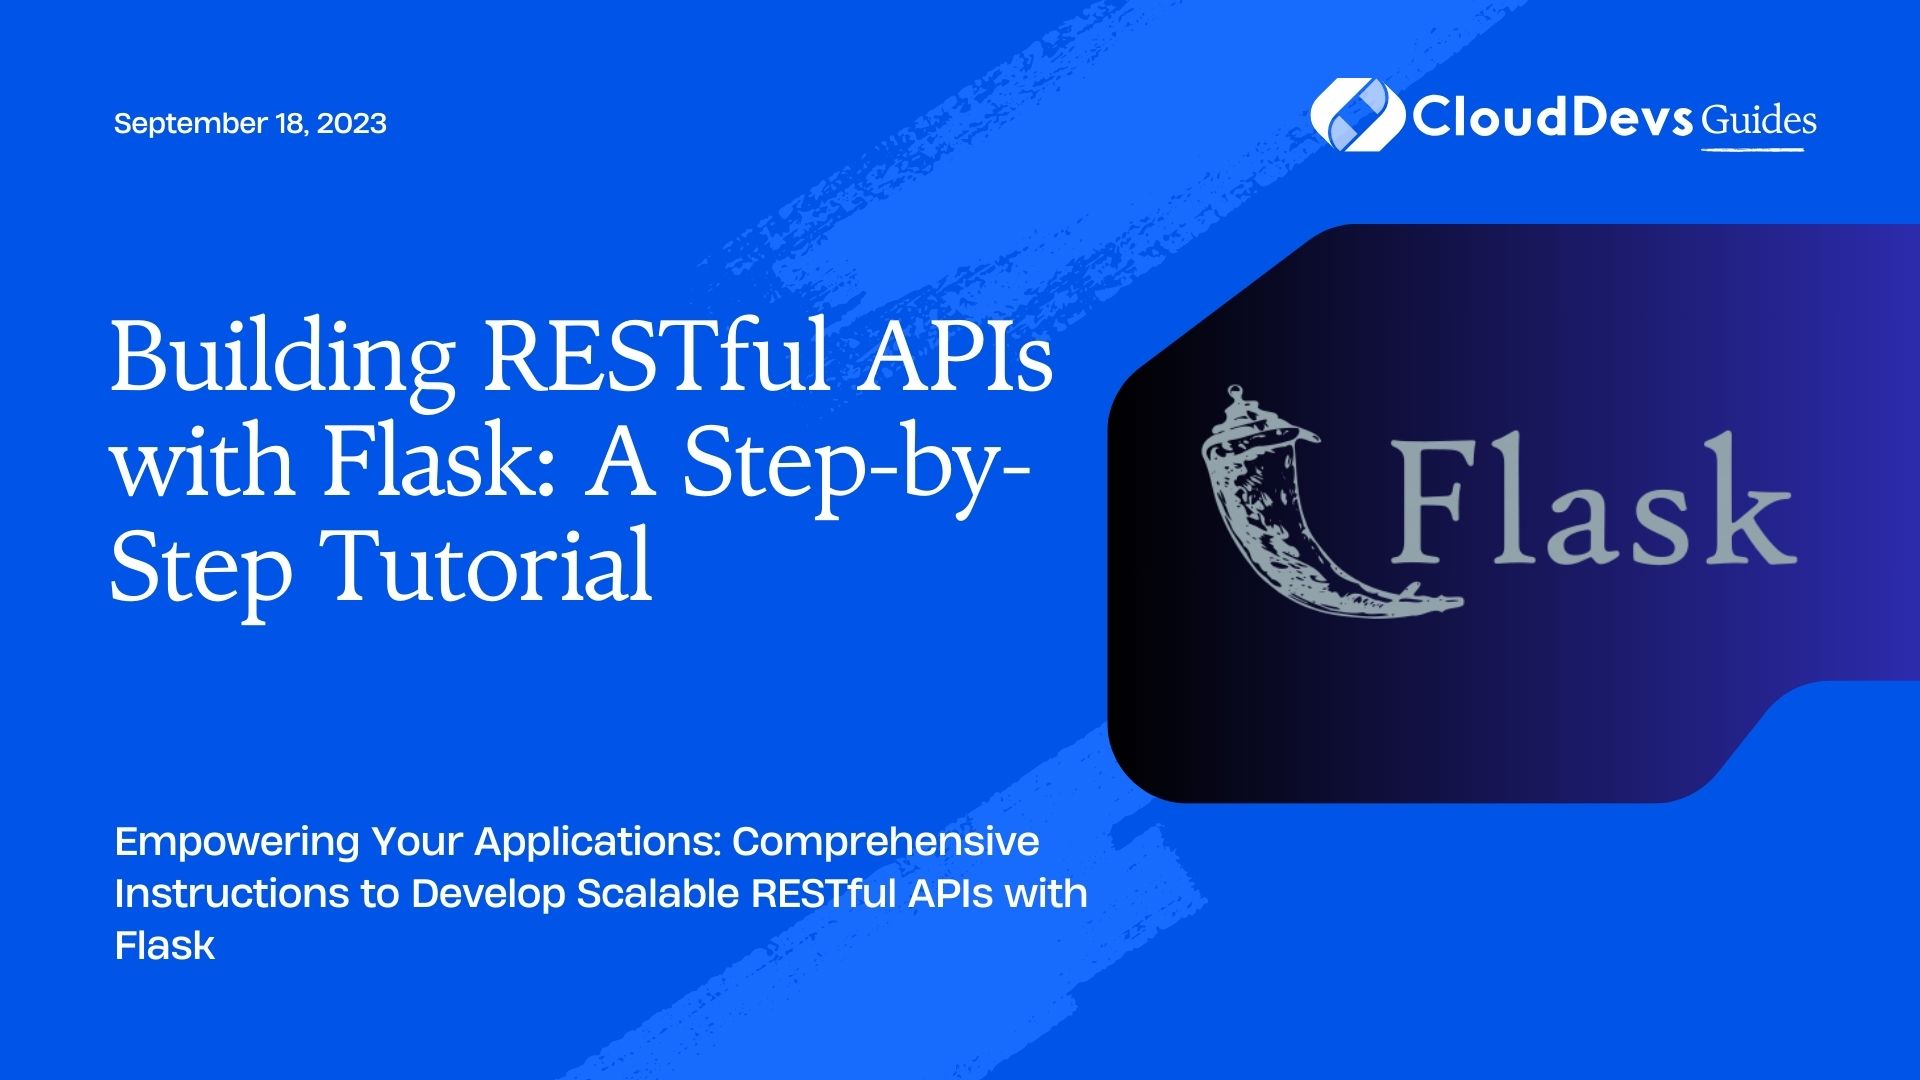 Building RESTful APIs with Flask: A Step-by-Step Tutorial